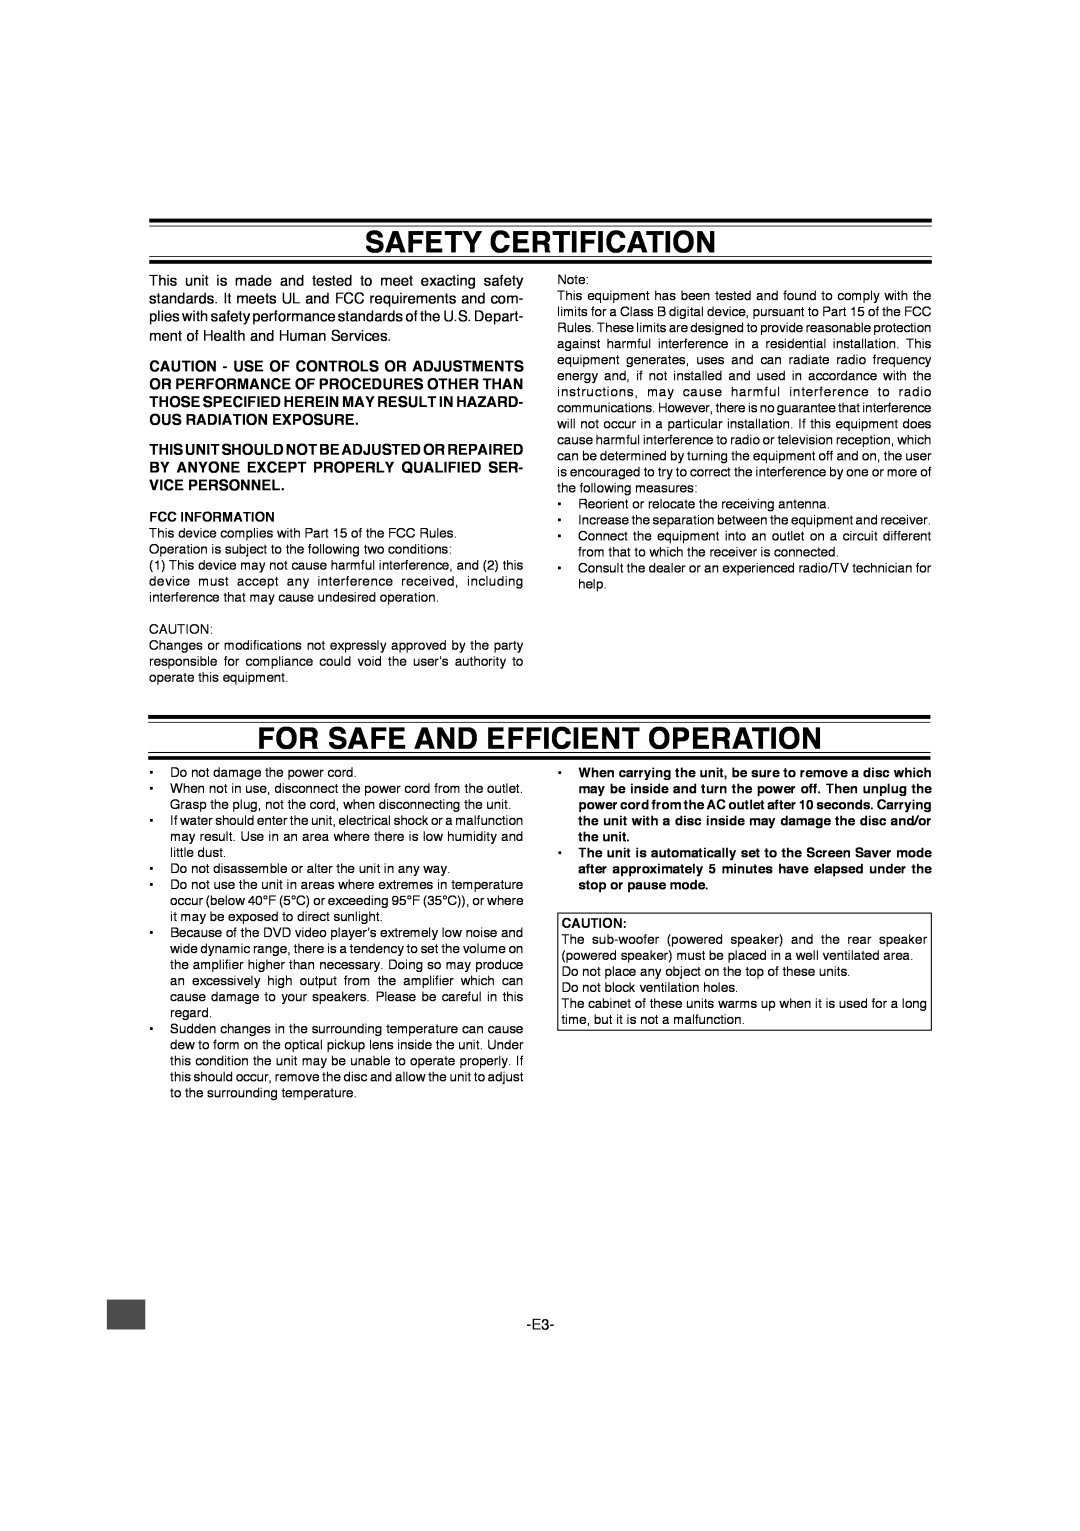 Sanyo DWM-4500 instruction manual Safety Certification, For Safe And Efficient Operation 